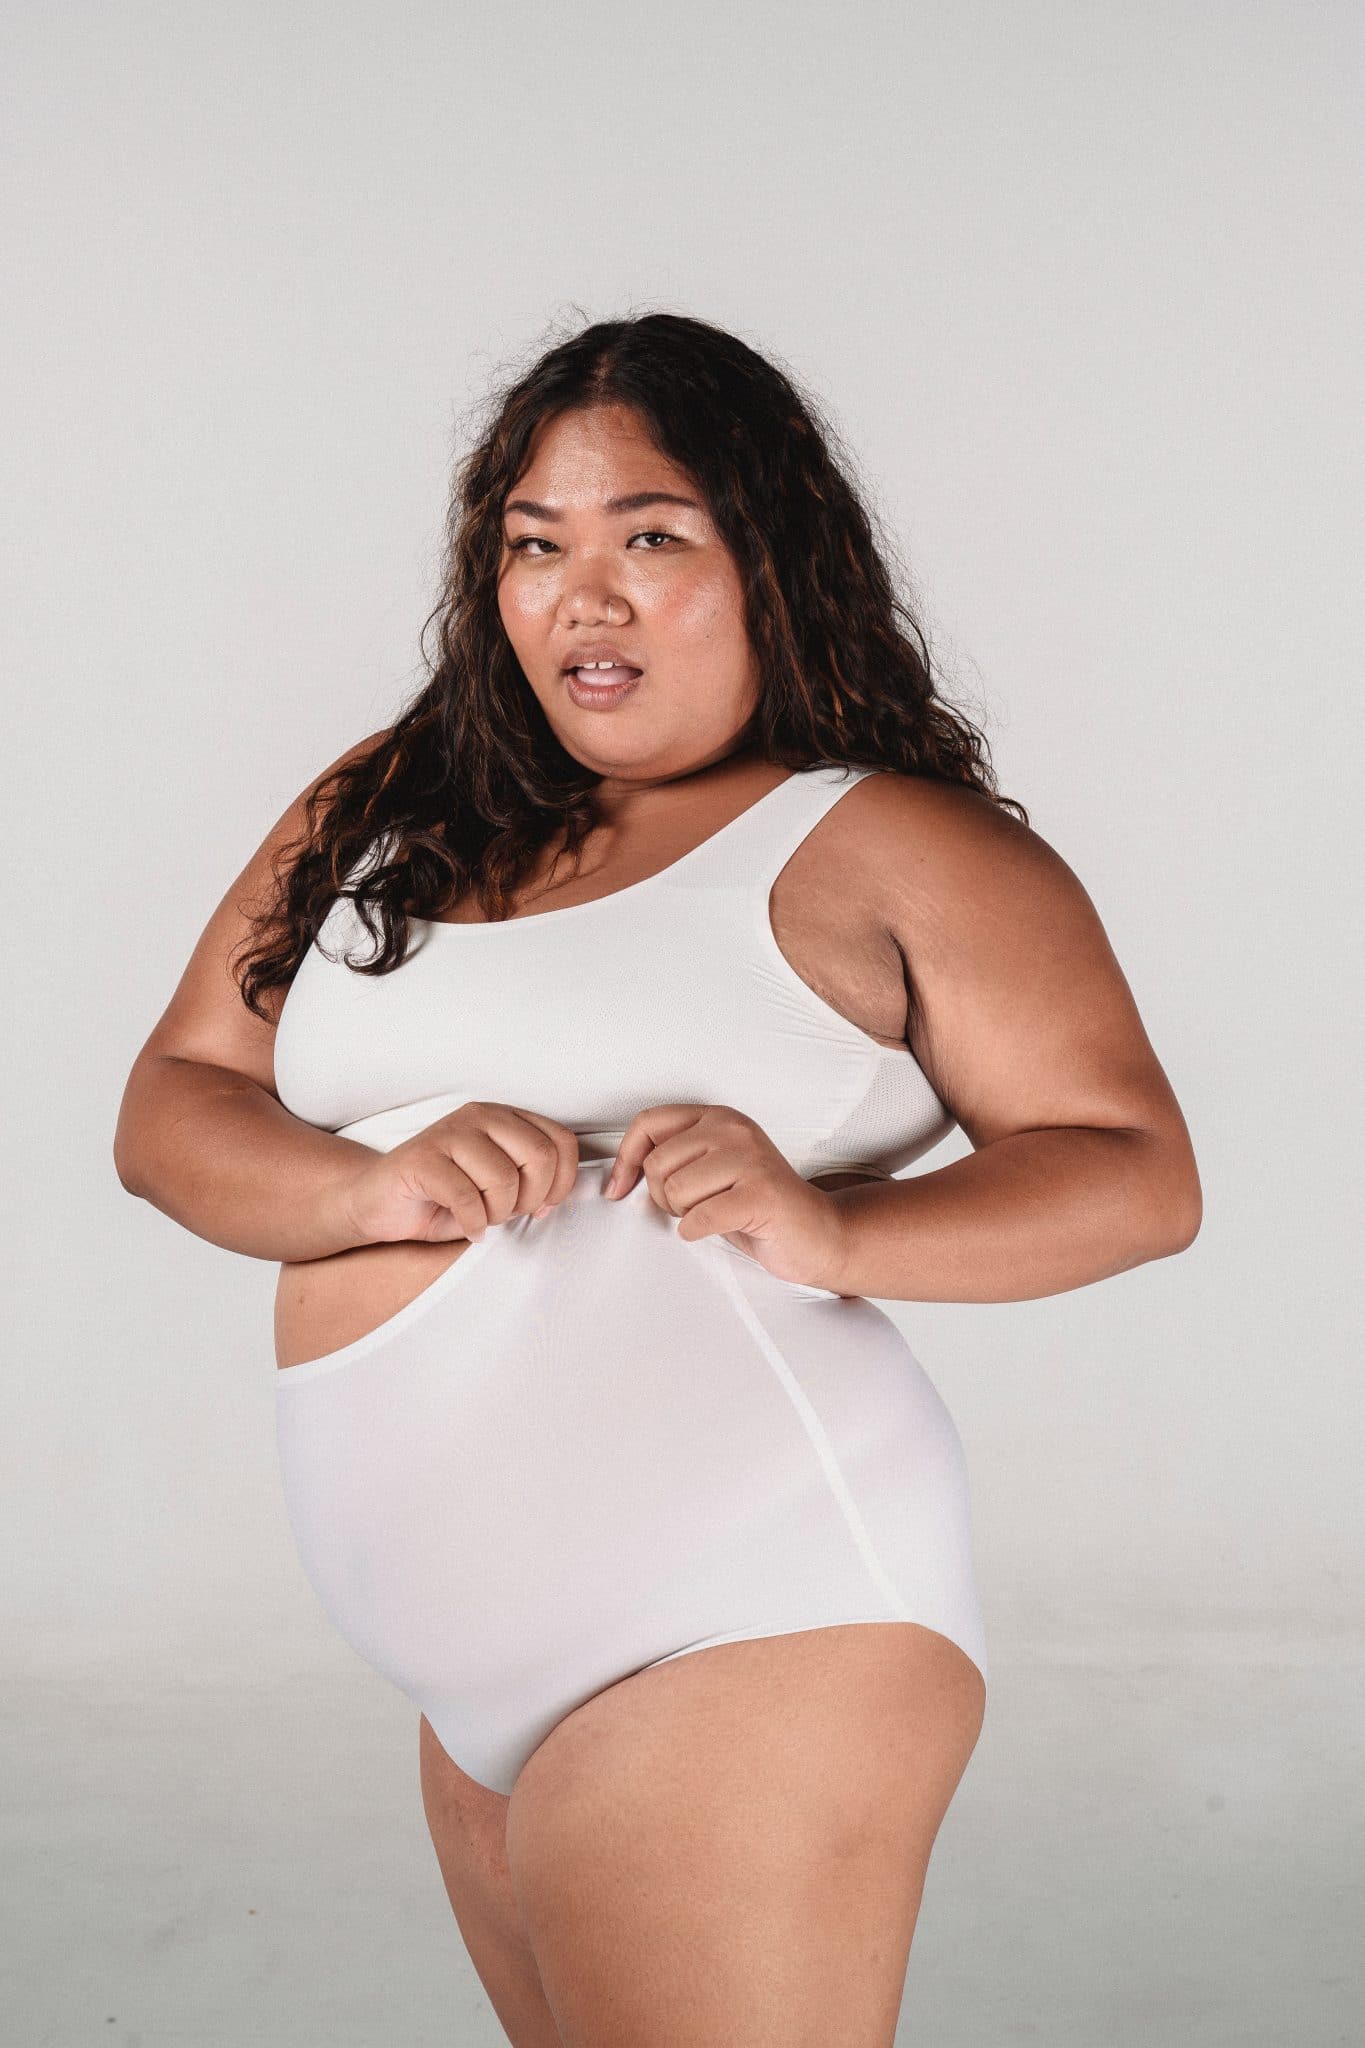 Same style different size. The full body tummy control comes in sizes